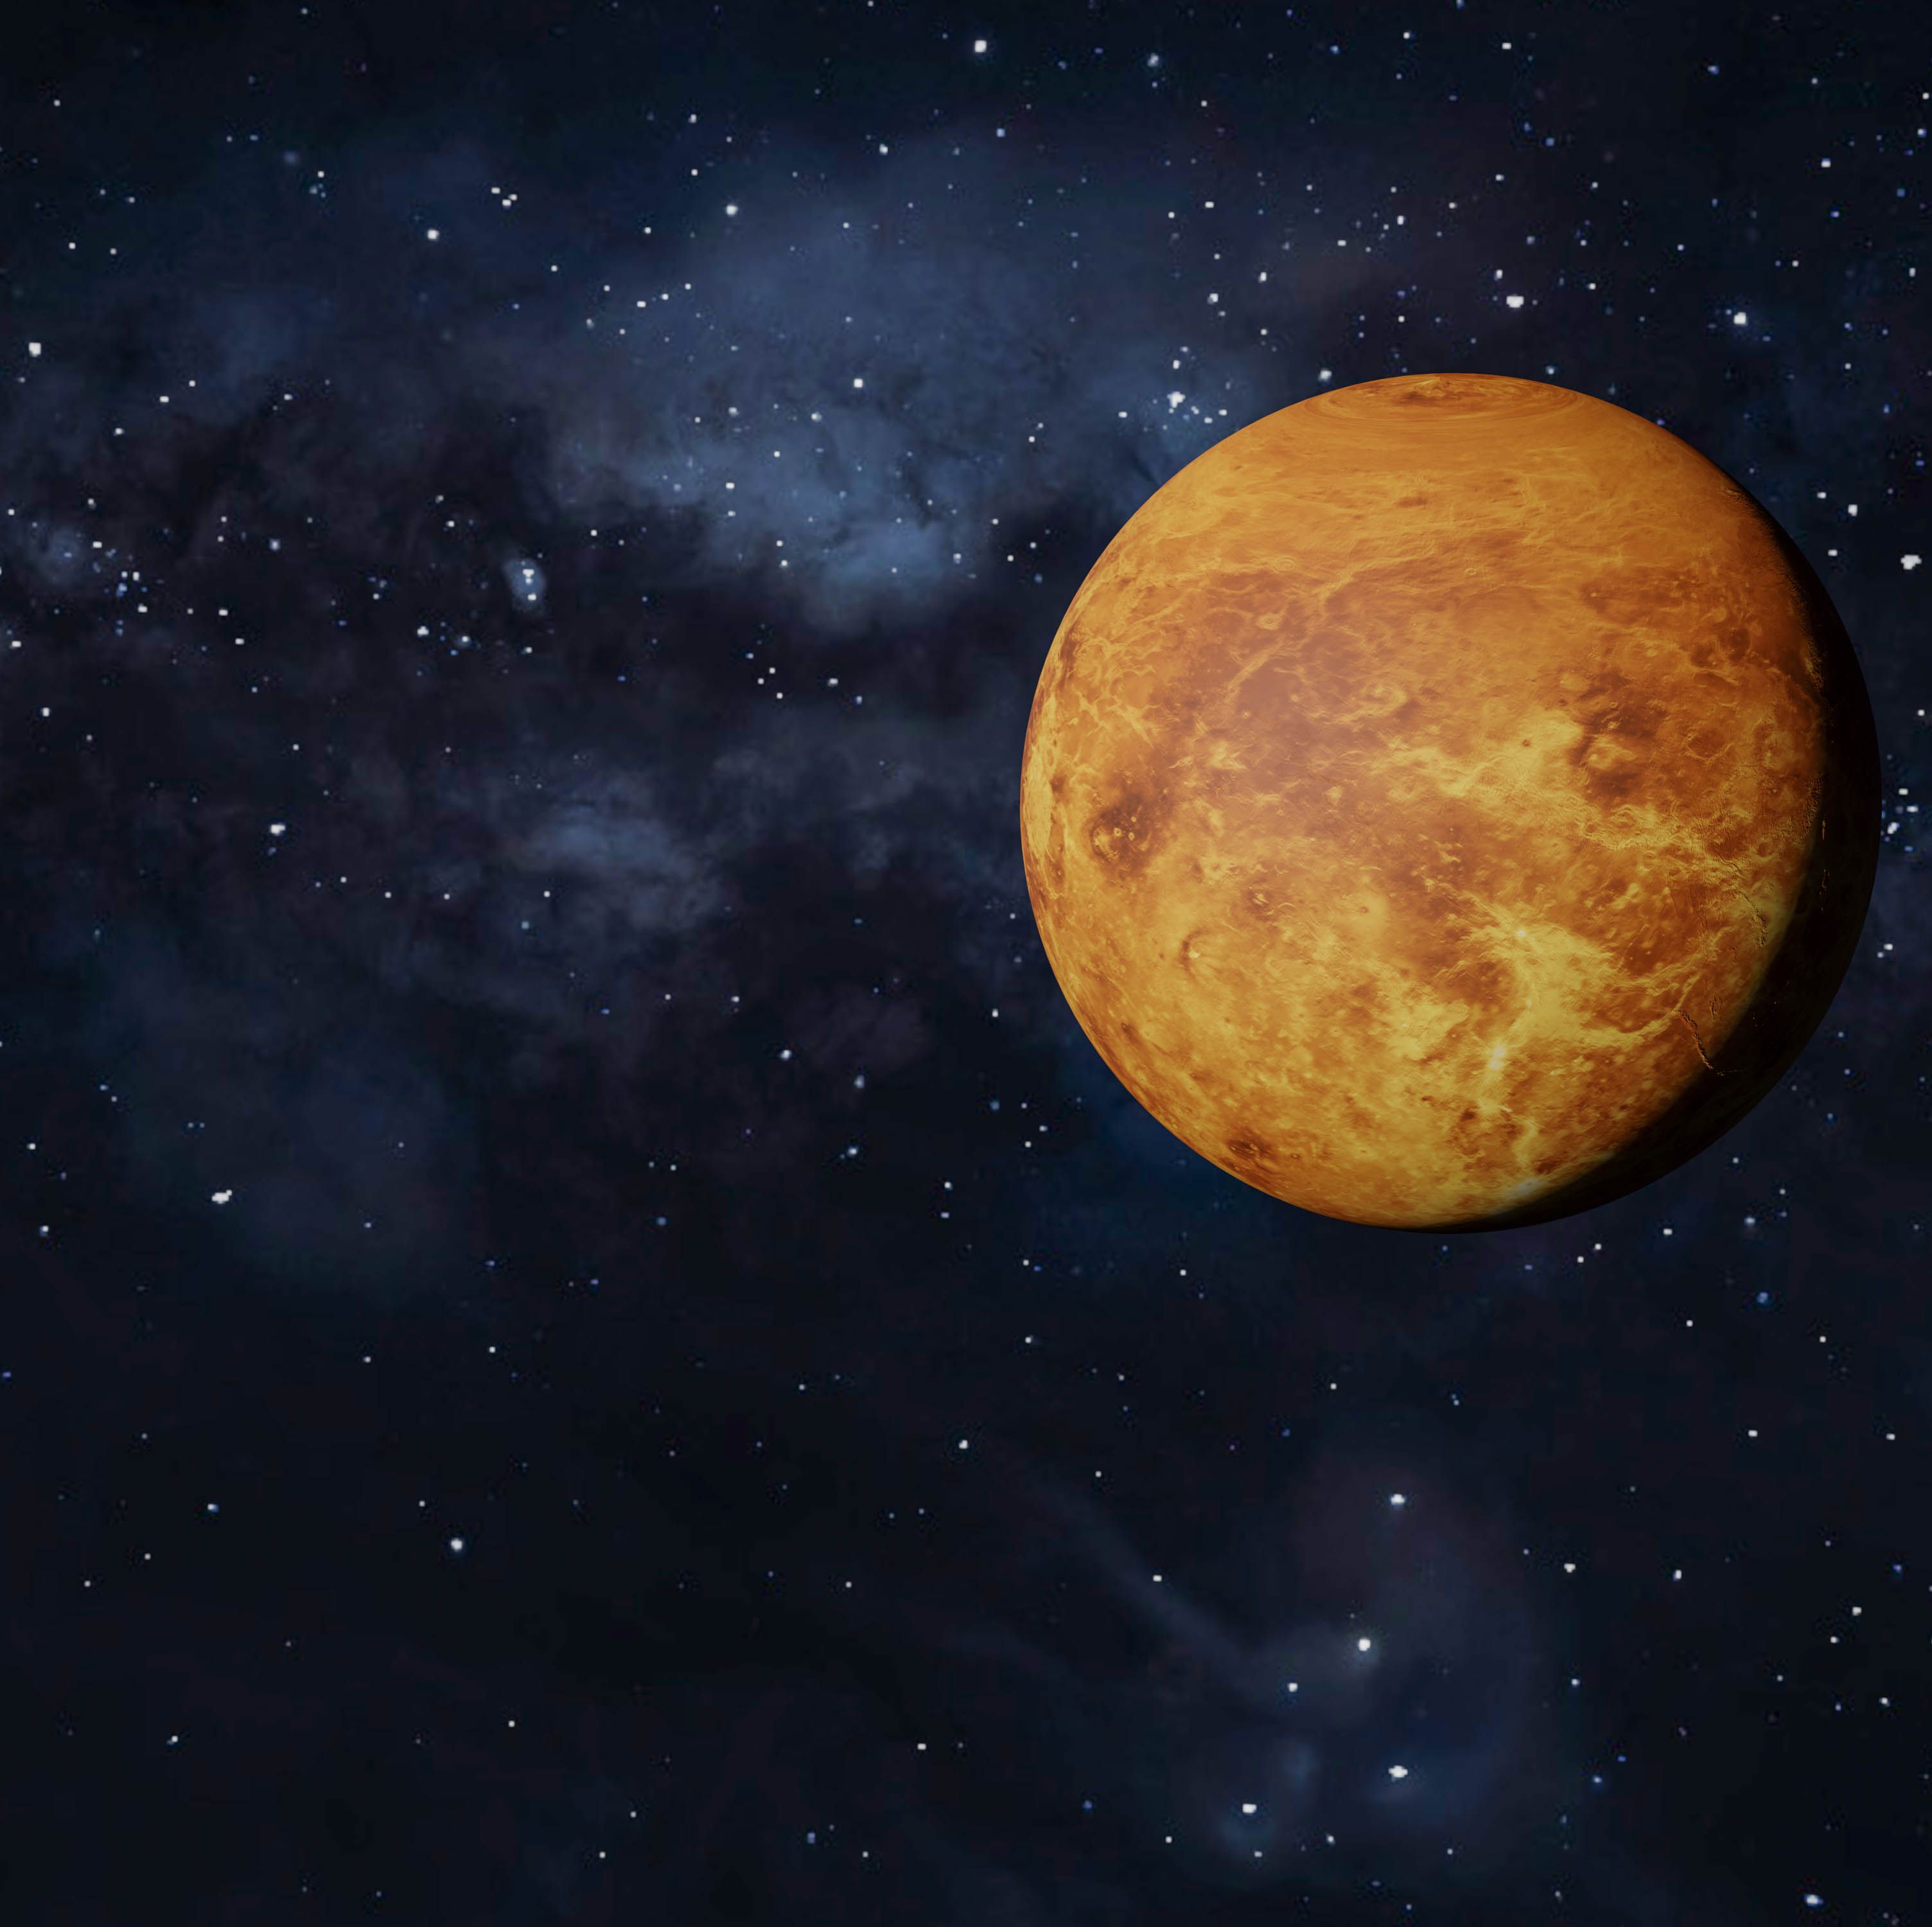 The Founder of OceanGate Wants to Send 1,000 People to Colonize Venus